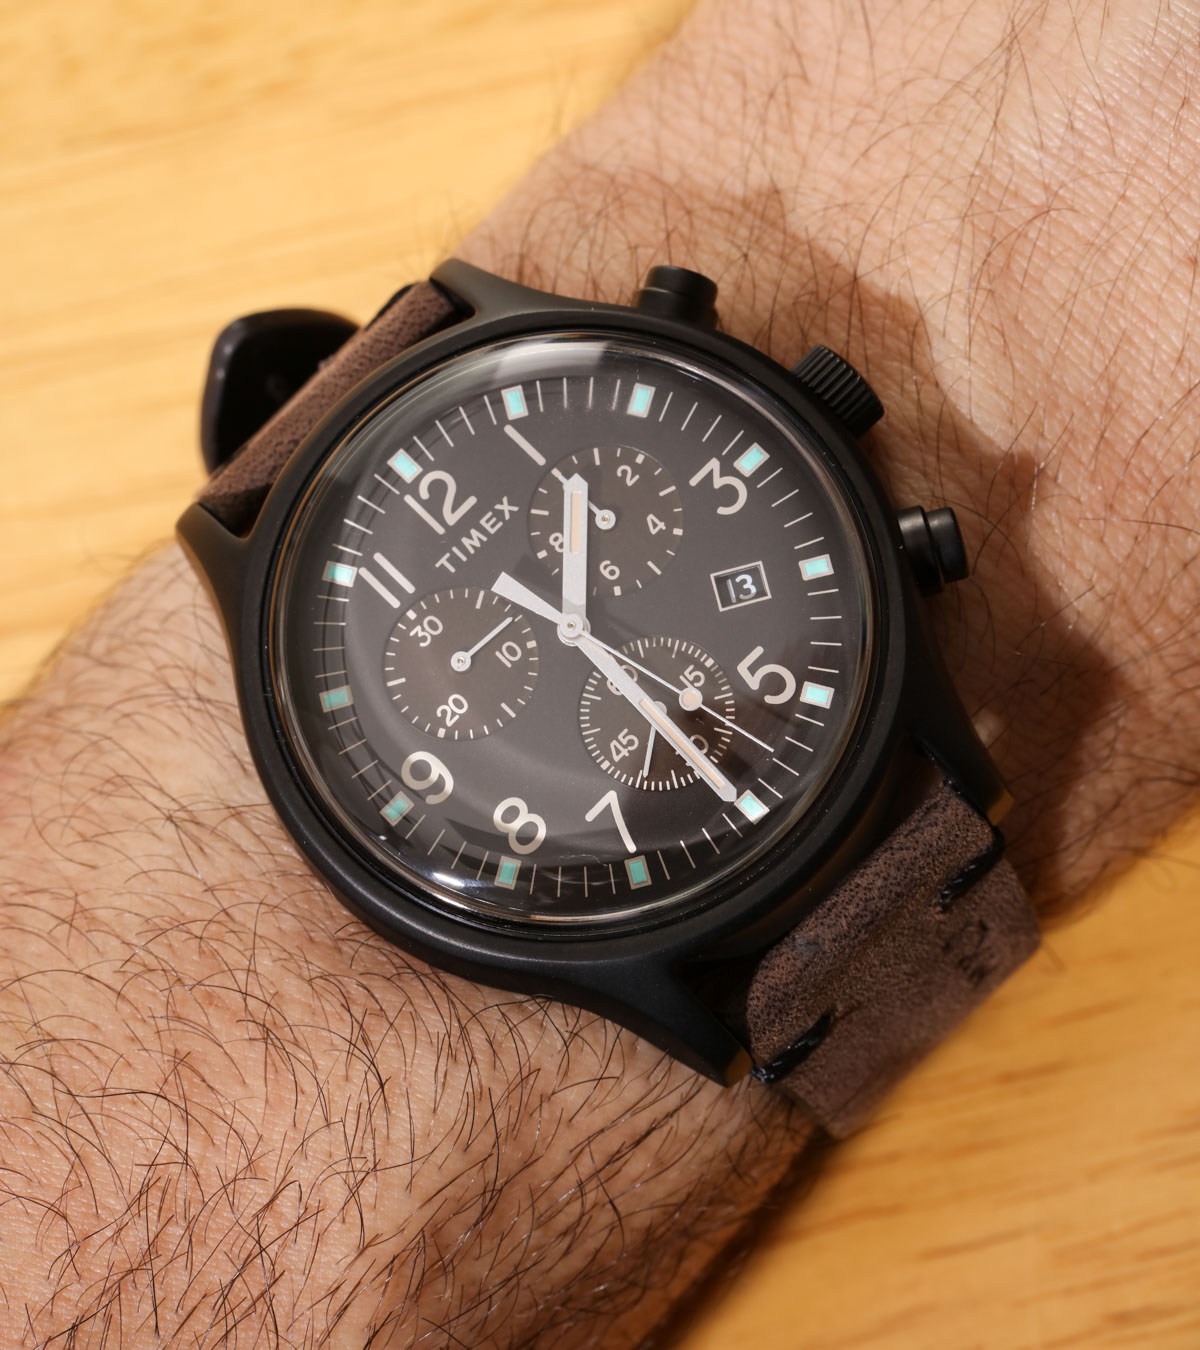 Timex MK1 Steel Chronograph 42mm Watch Review | Page 2 of 2 | aBlogtoWatch